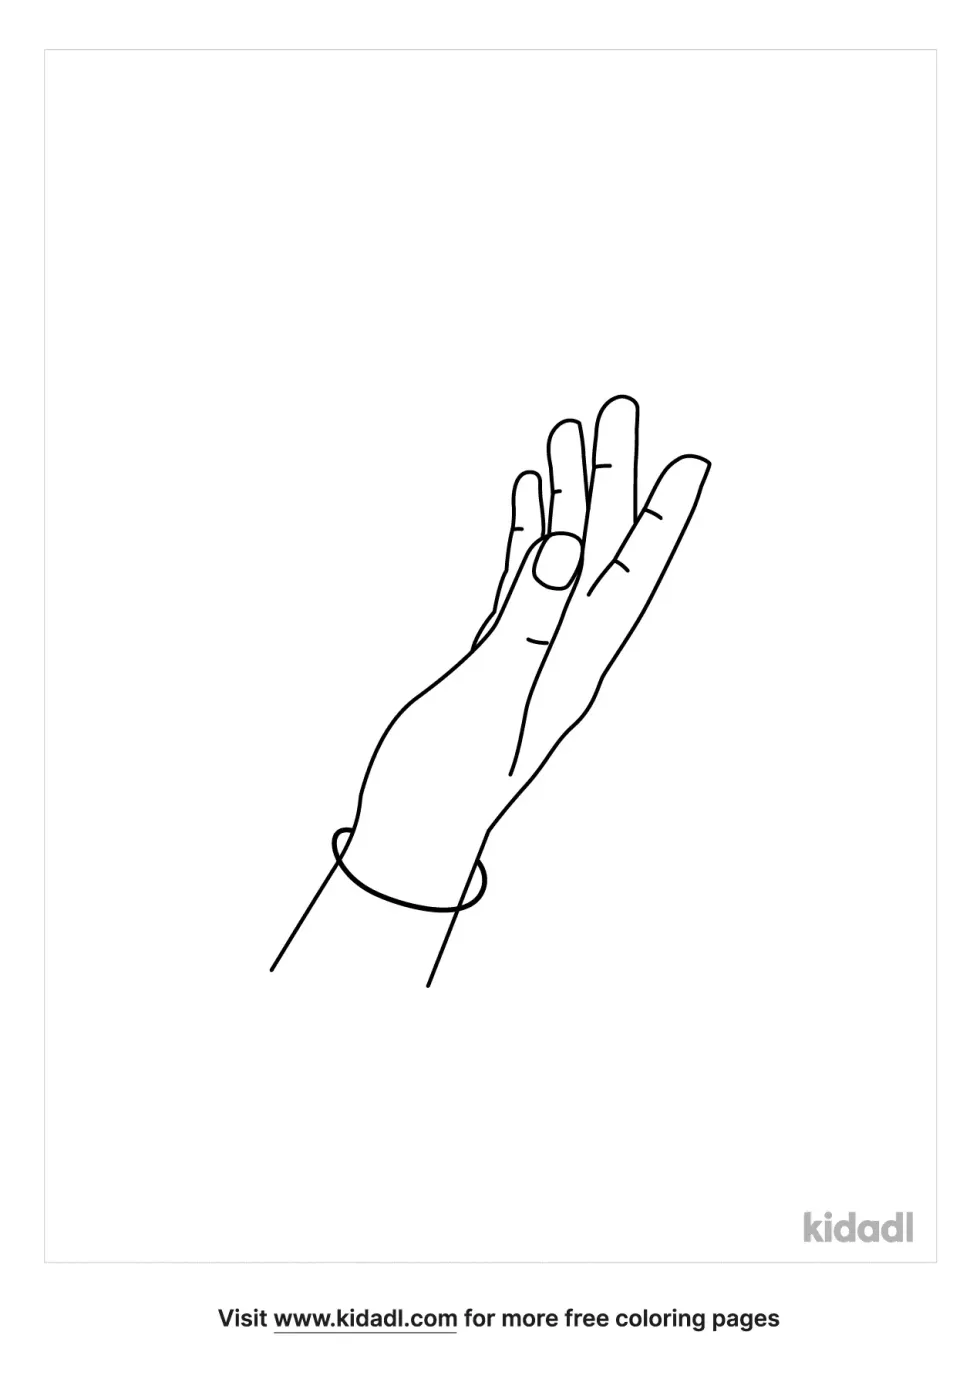 Reaching Hand Coloring Page